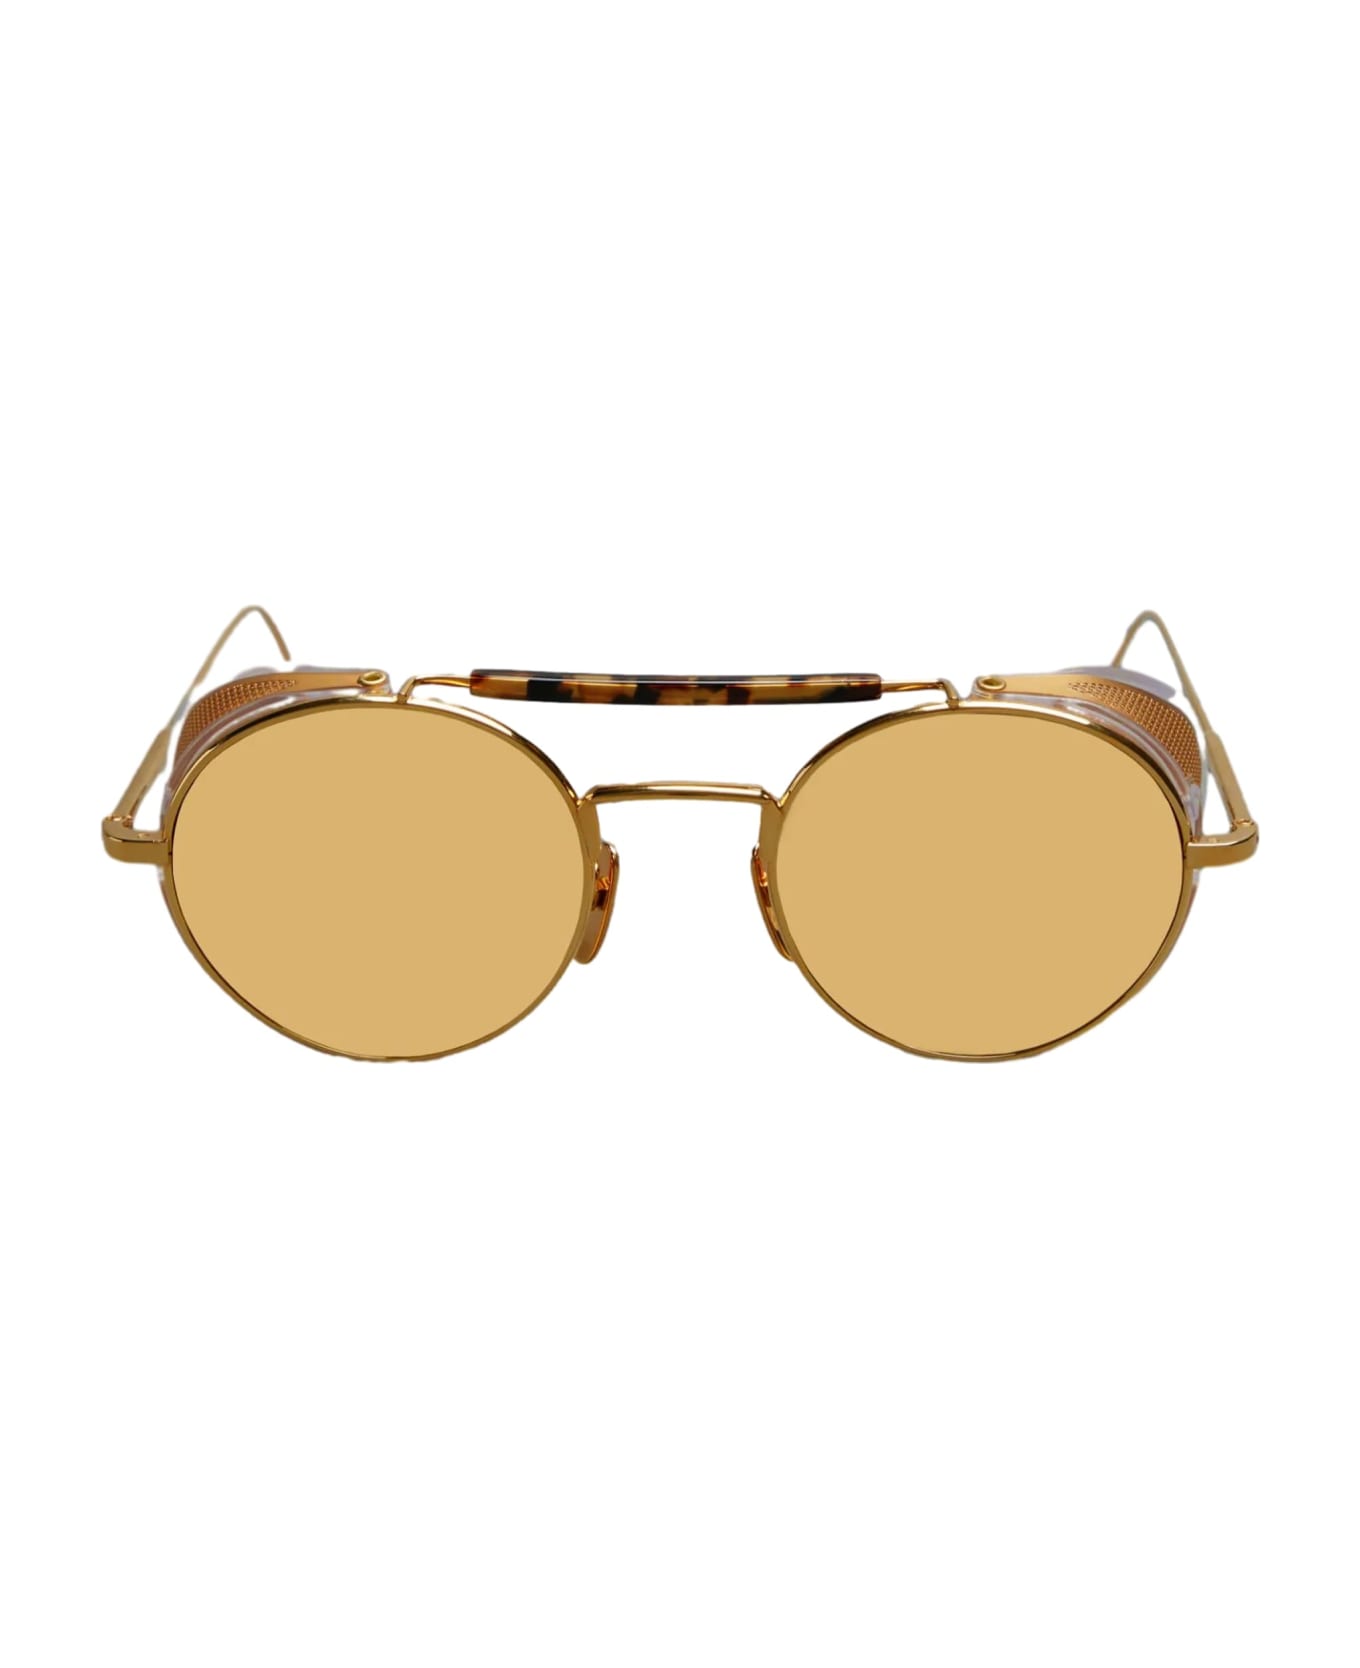 Thom Browne Round - Gold (limited Edition) Sunglasses - Gold